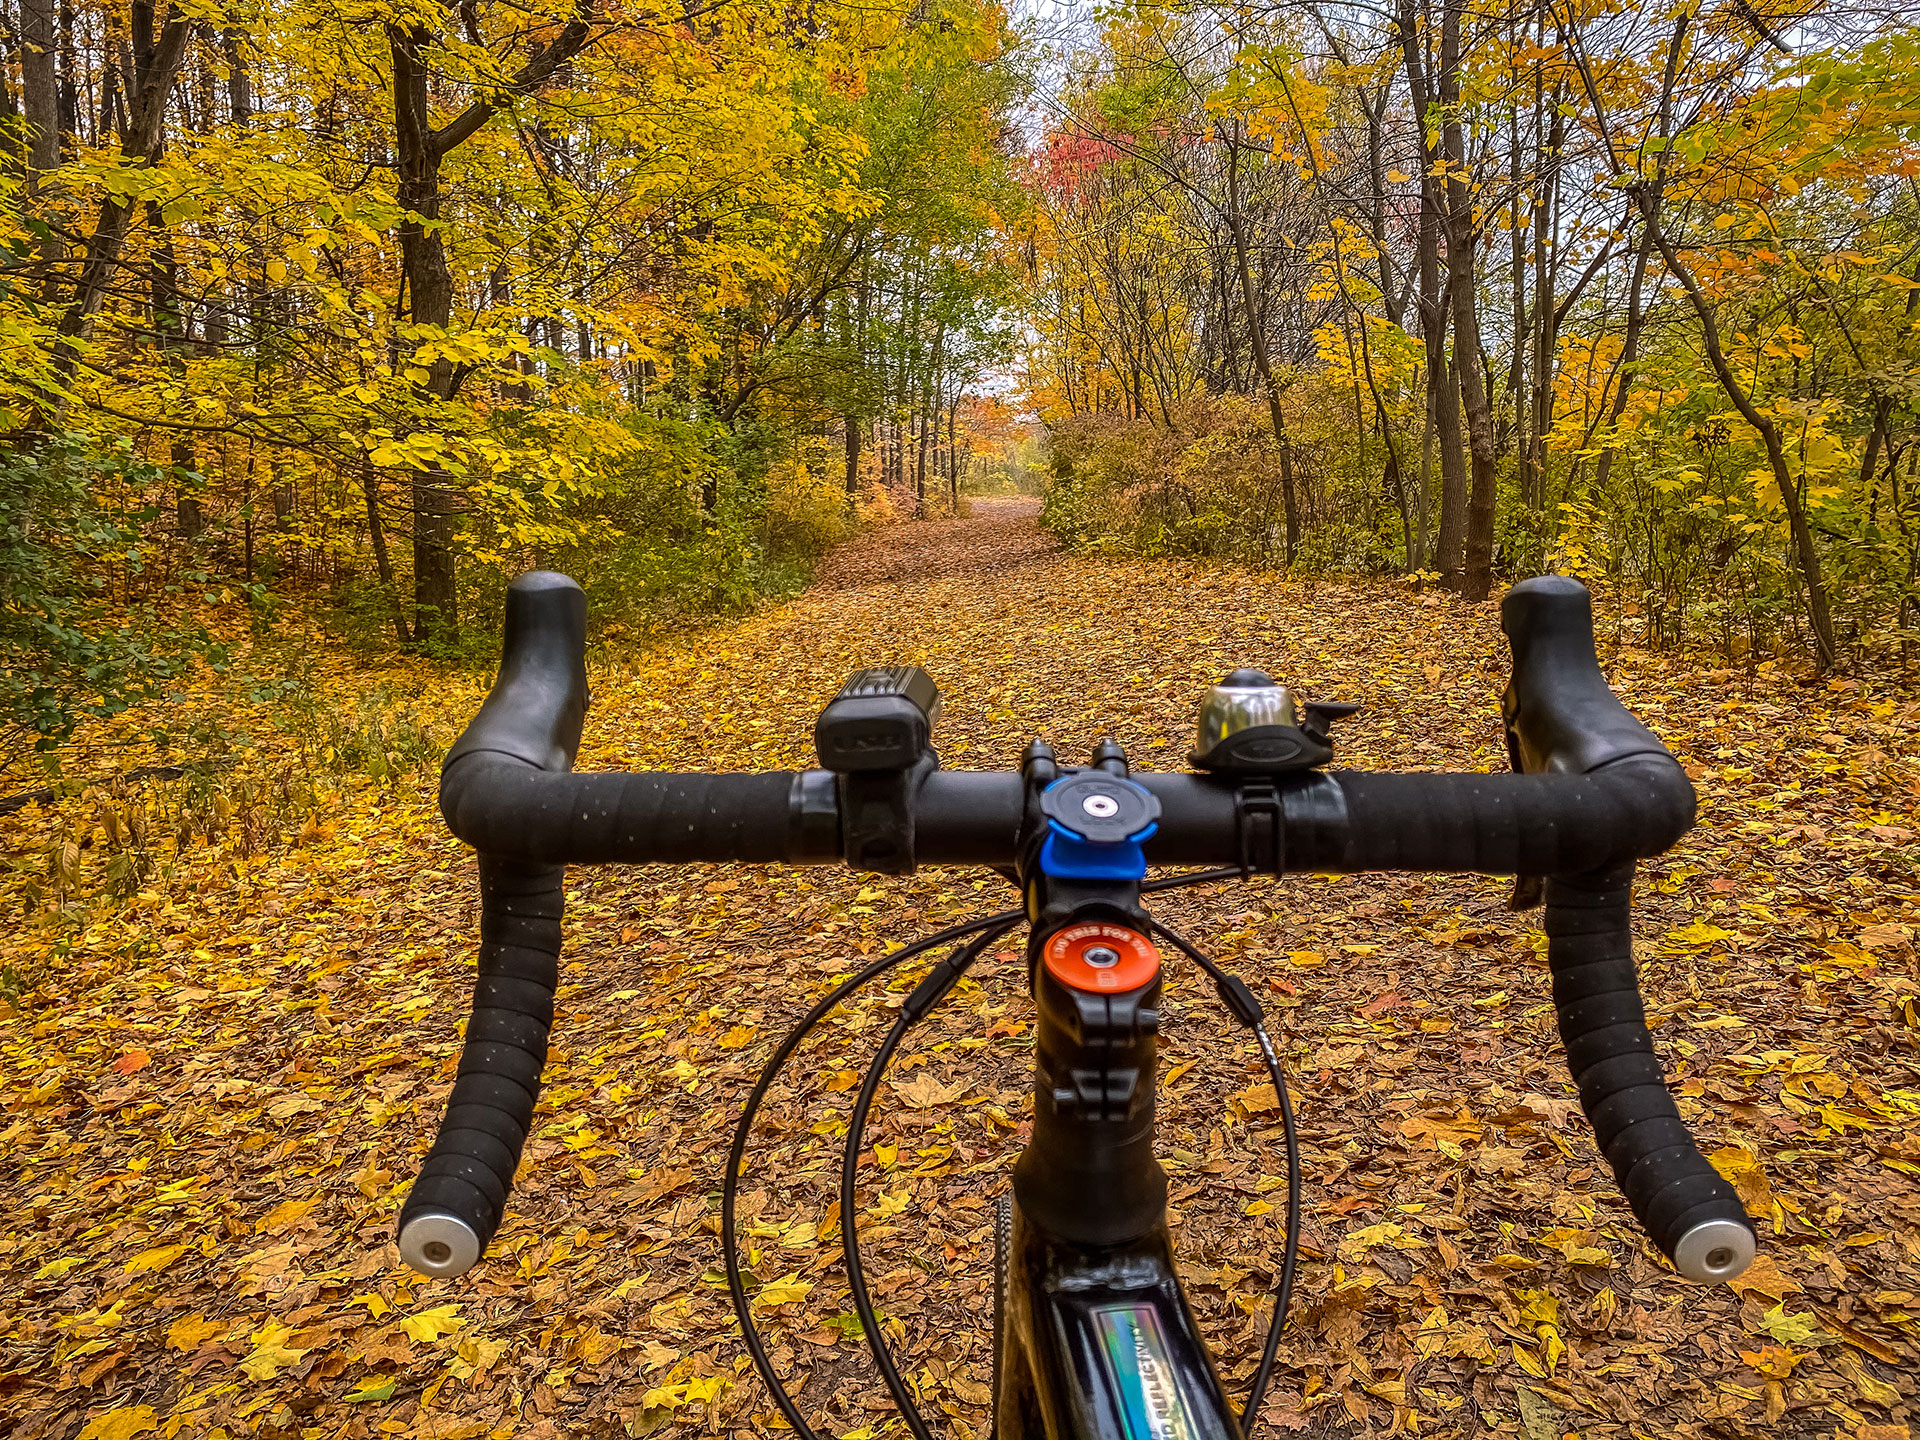 bicycle rider's POV on an autumn leaf-covered path with bright foliage surrounding